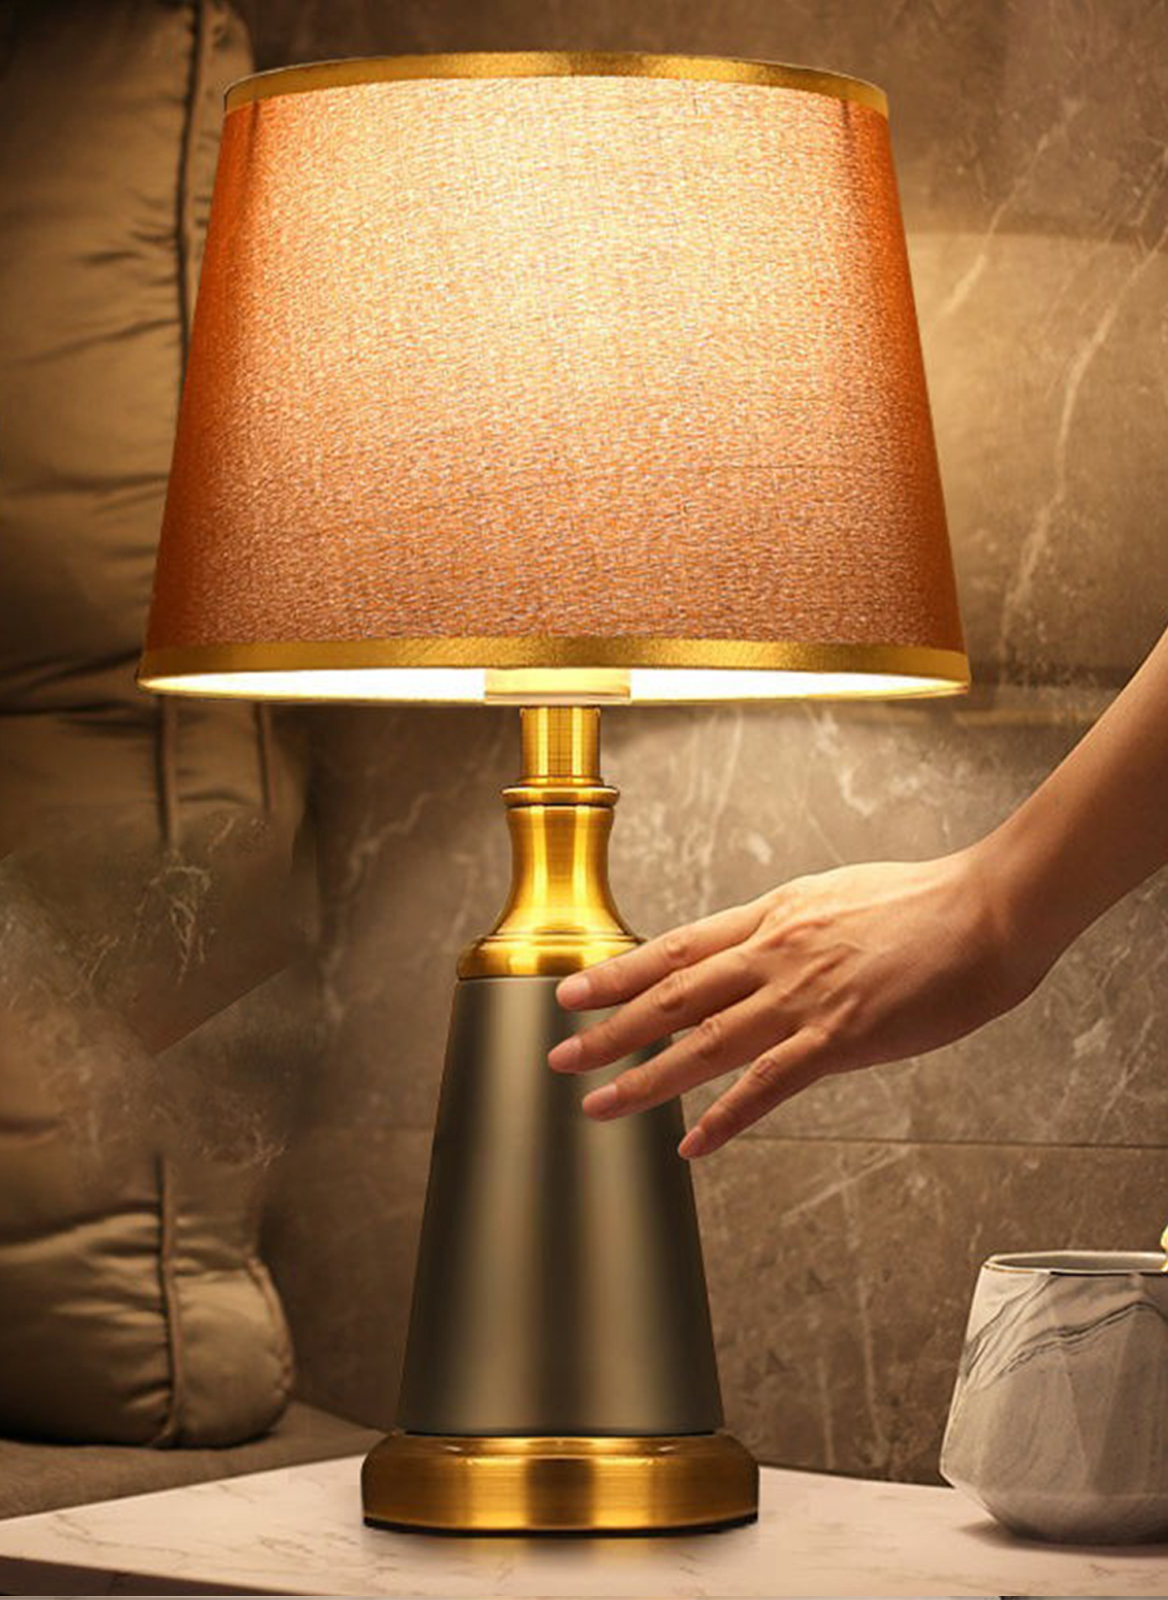 LED Home 3-Color Dimming Table Lamp, Touch Sensor Bedside Lamp